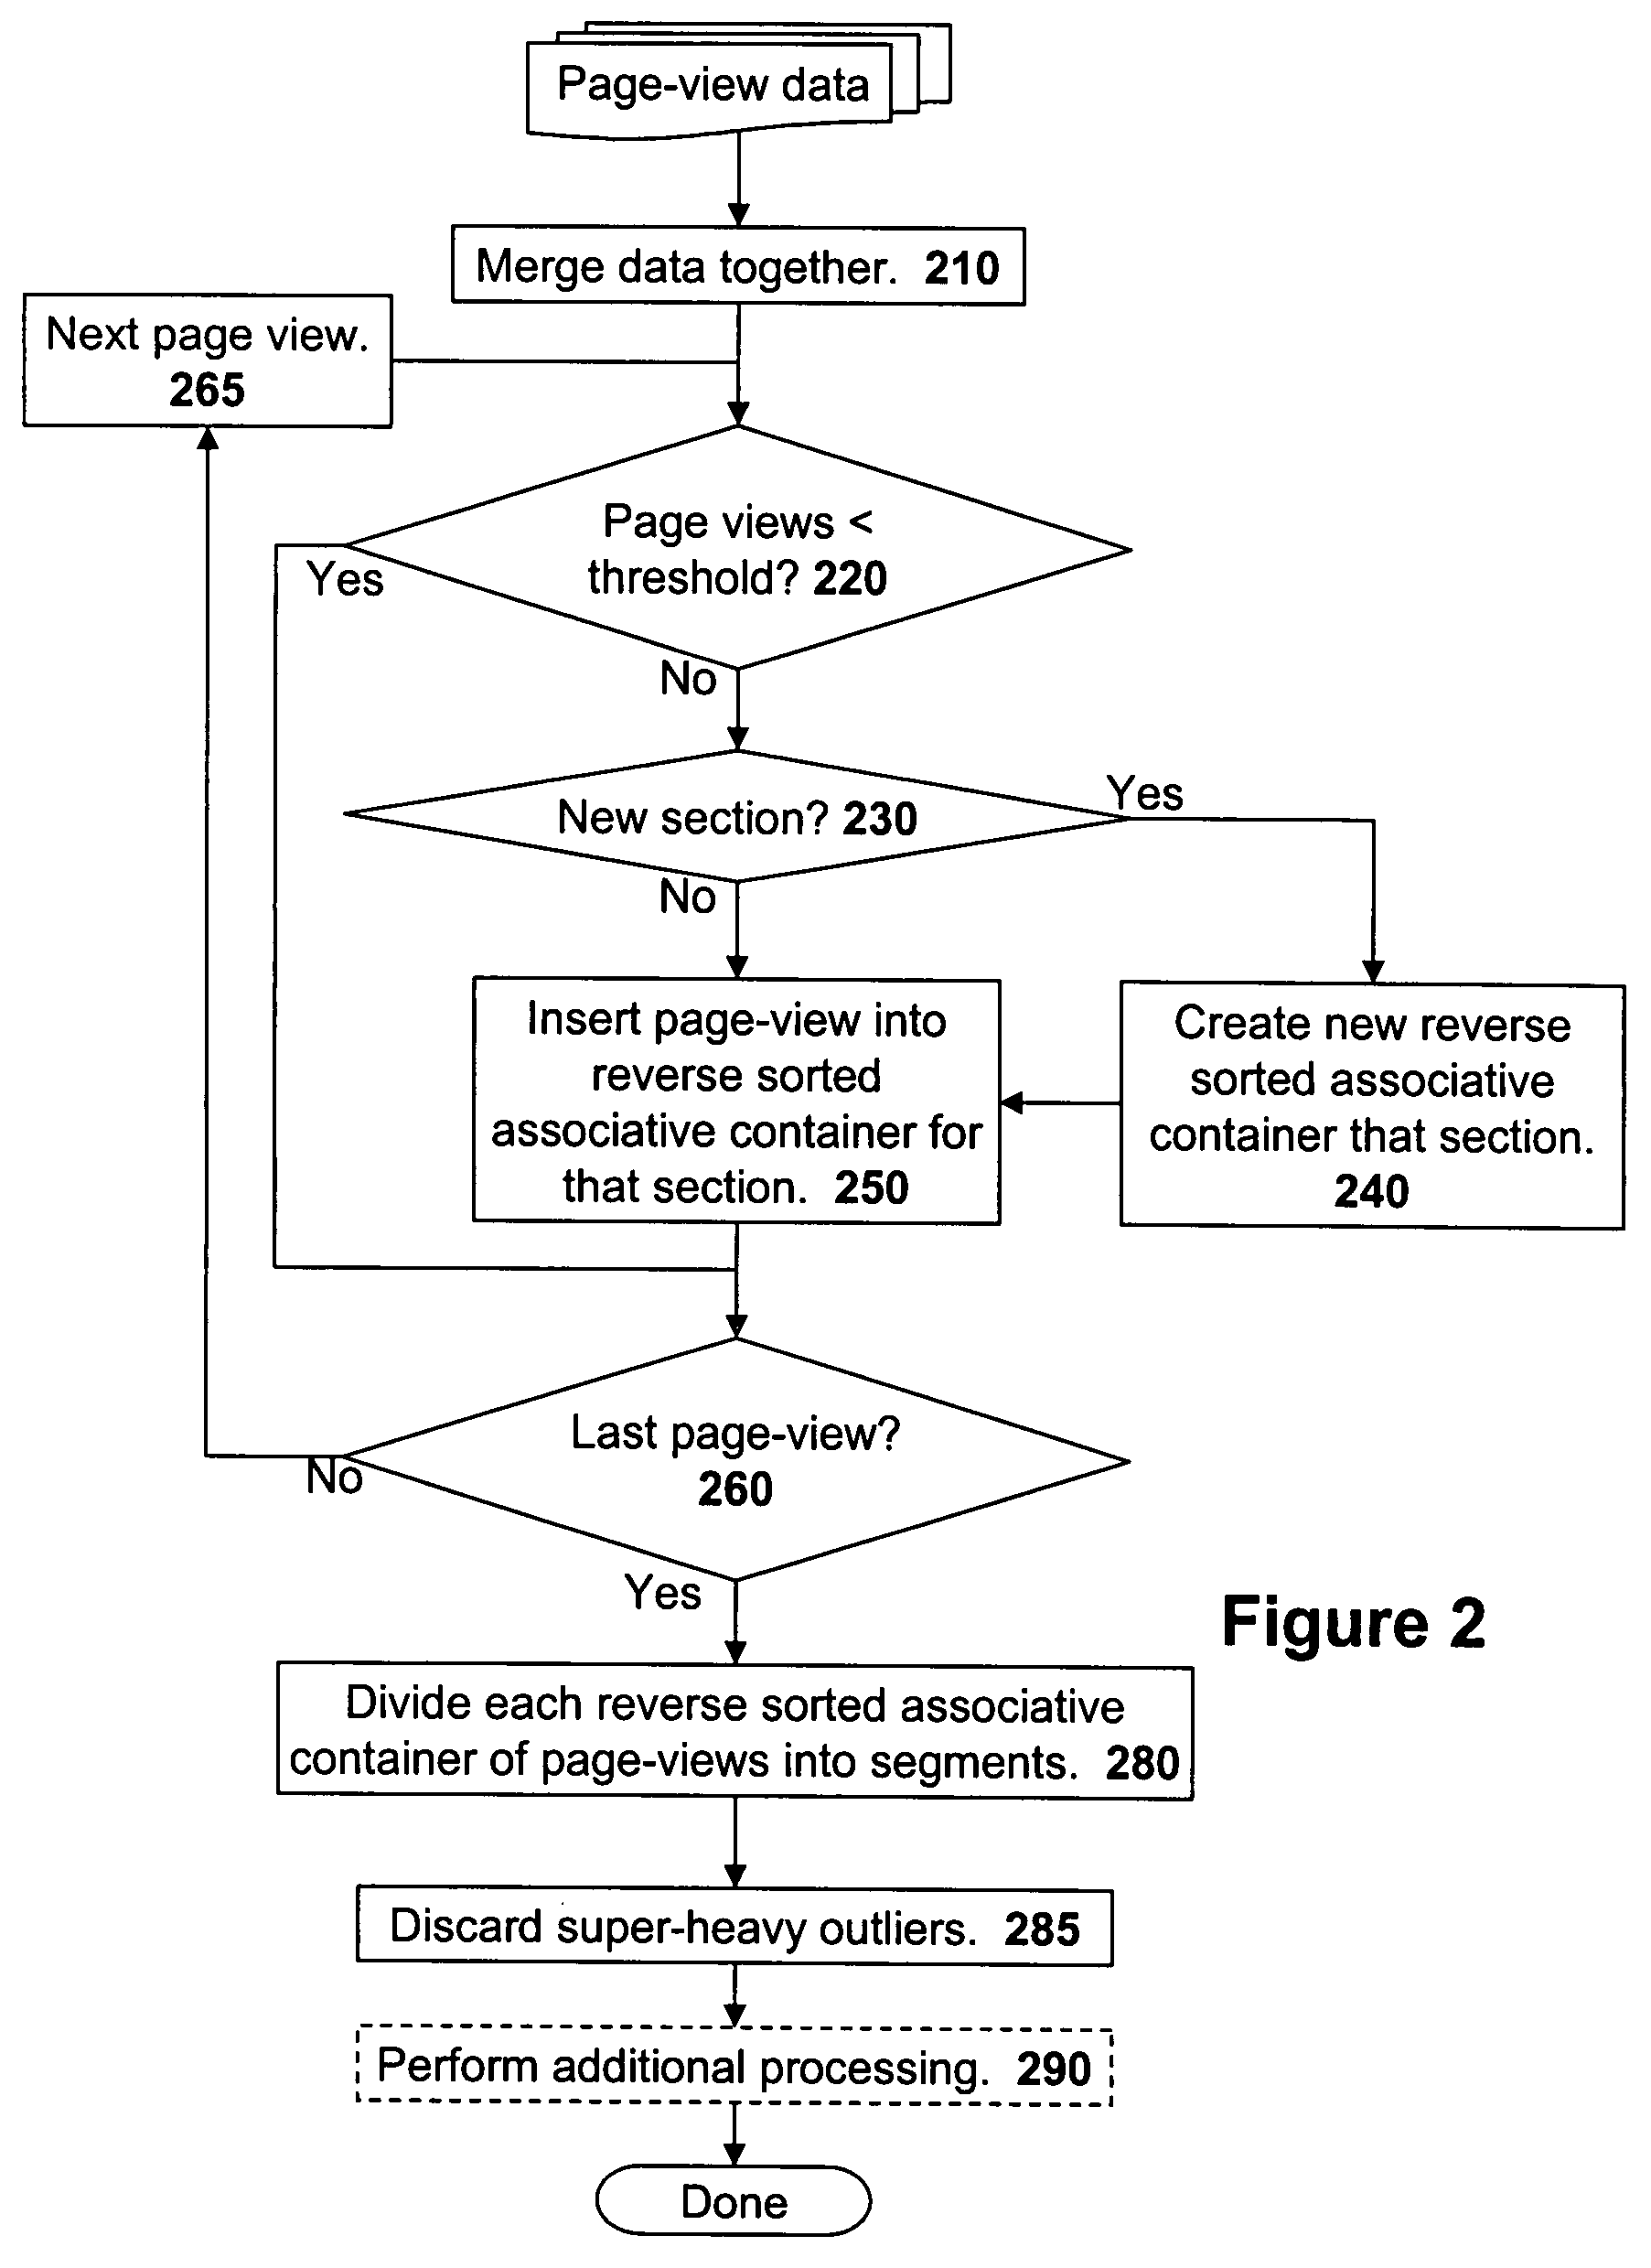 Methods of processing and segmenting web usage information